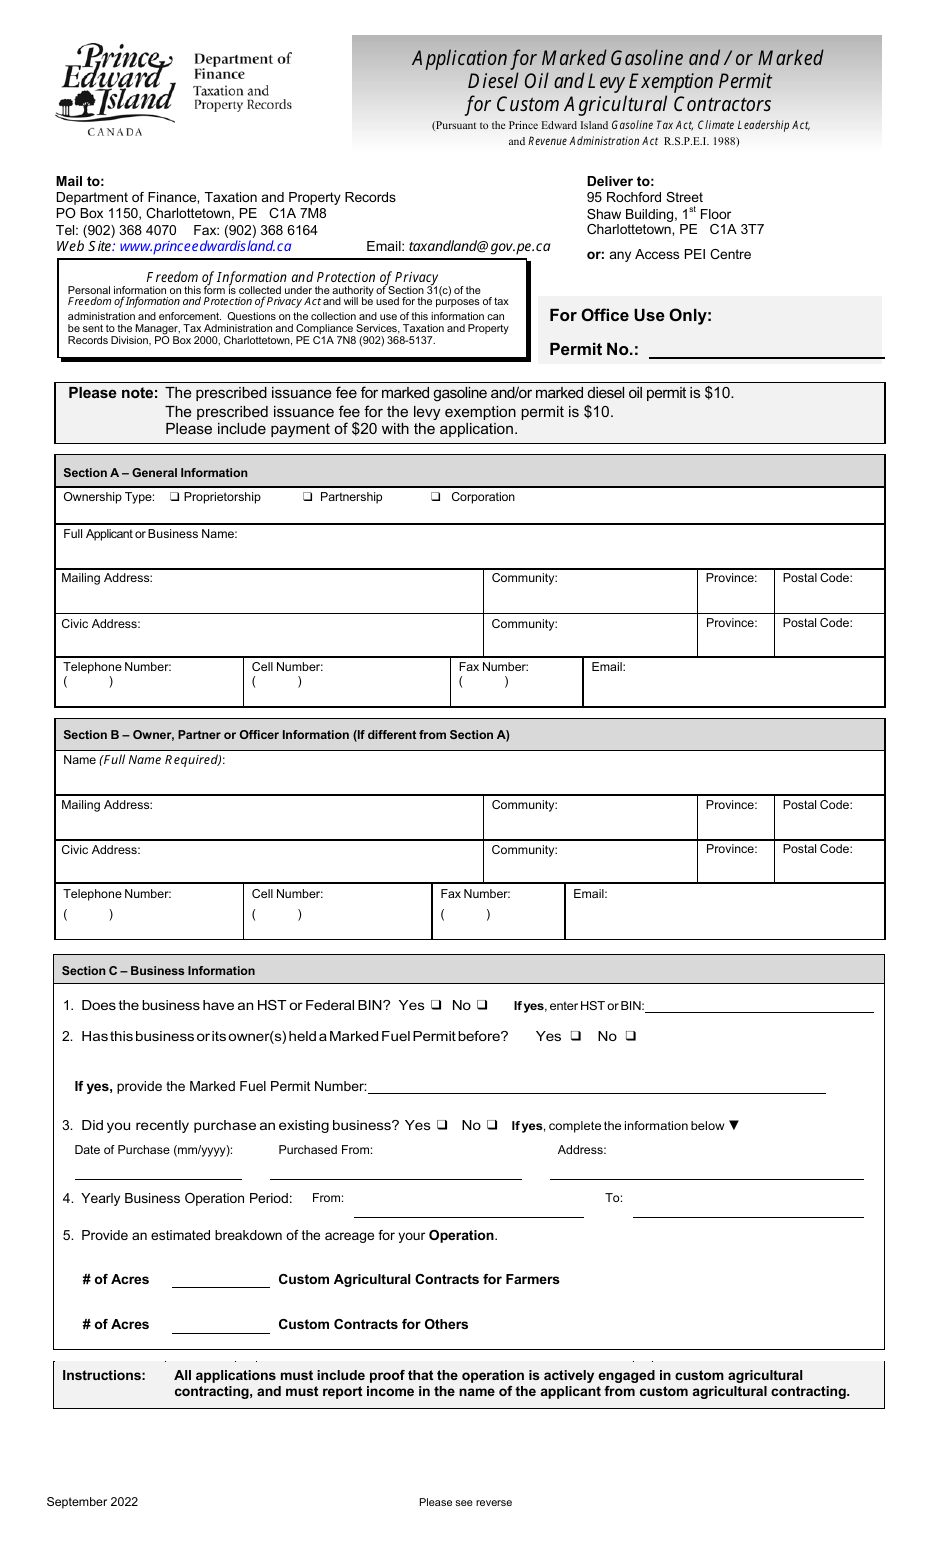 Application for Marked Gasoline and / or Marked Diesel Oil and Levy Exemption Permit for Custom Agricultural Contractors - Prince Edward Island, Canada, Page 1